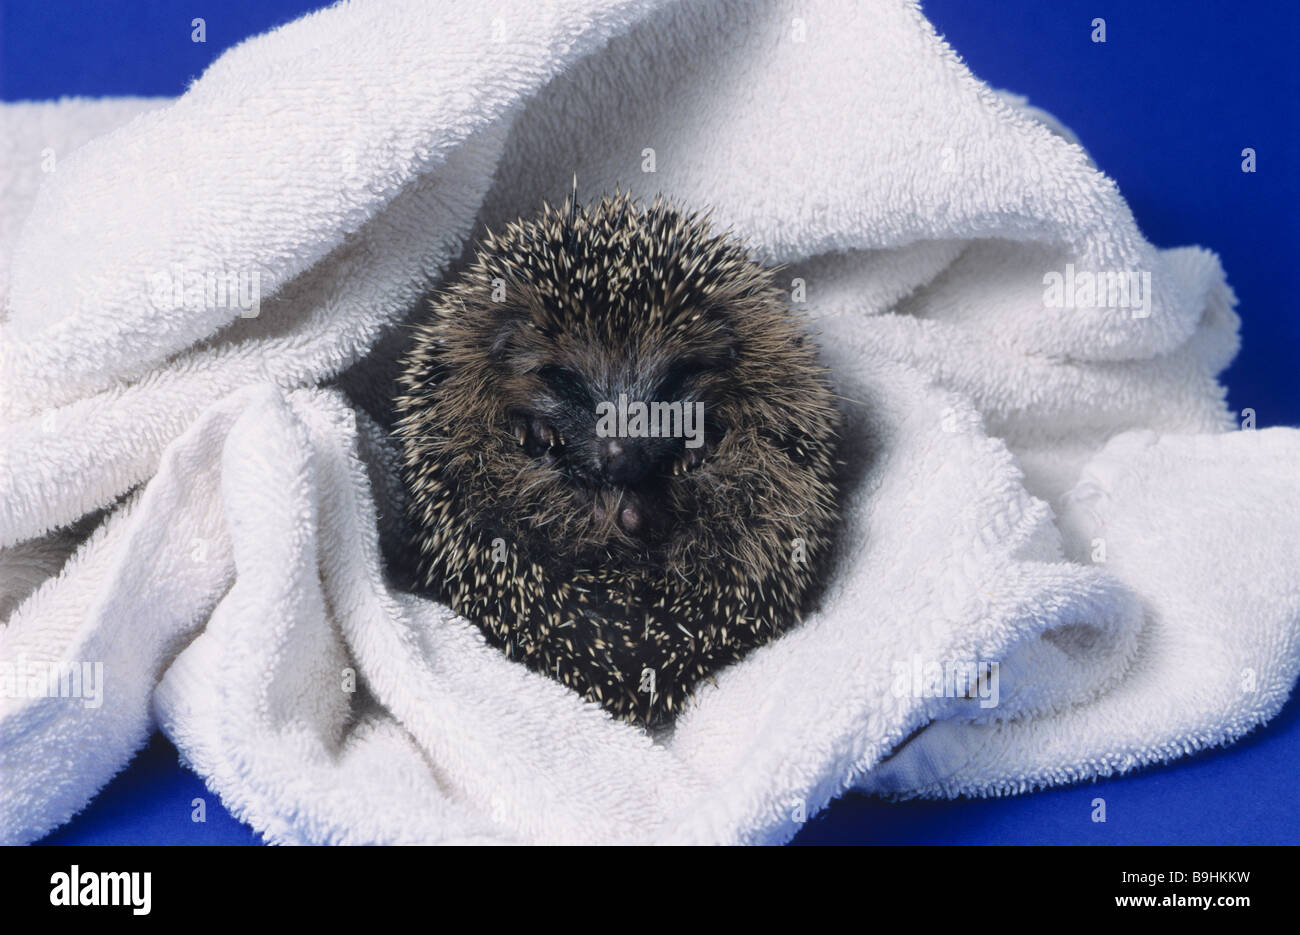 West European Hedgehog (Erinaceus europaeus) wrapped in a white towel after bathing Stock Photo